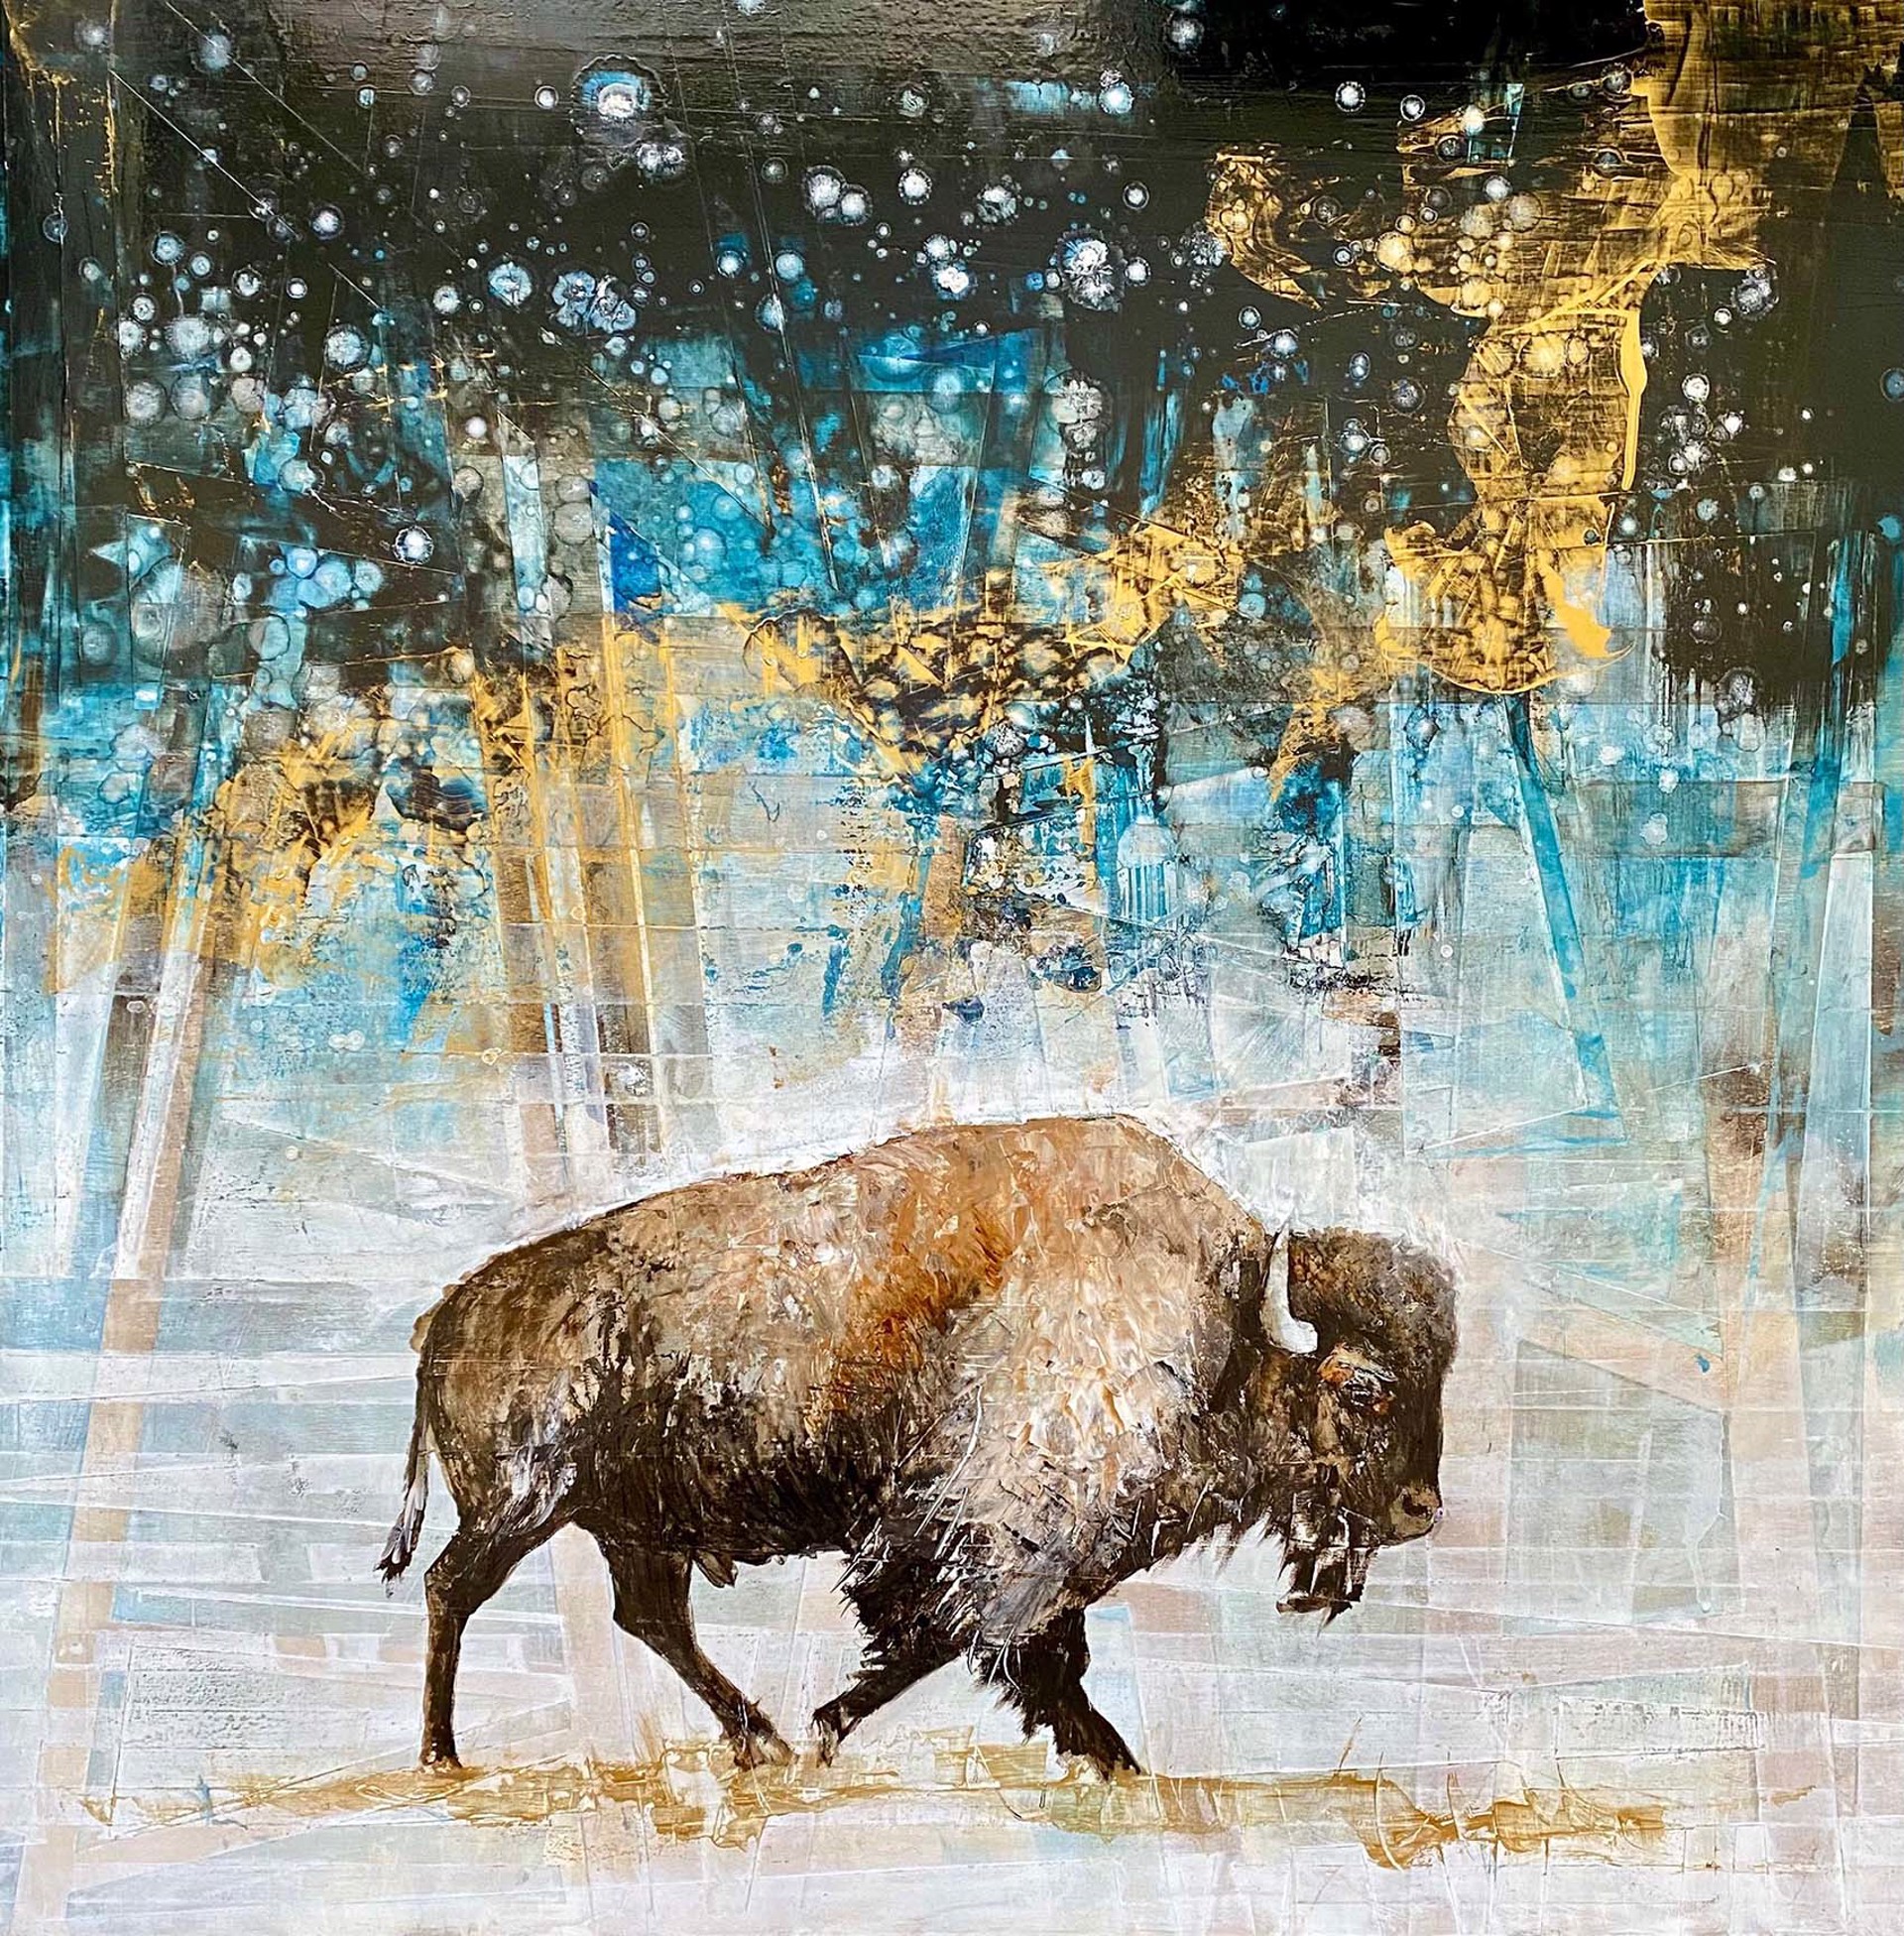 Bison Bull Walking In The Star Filled Night Sky.